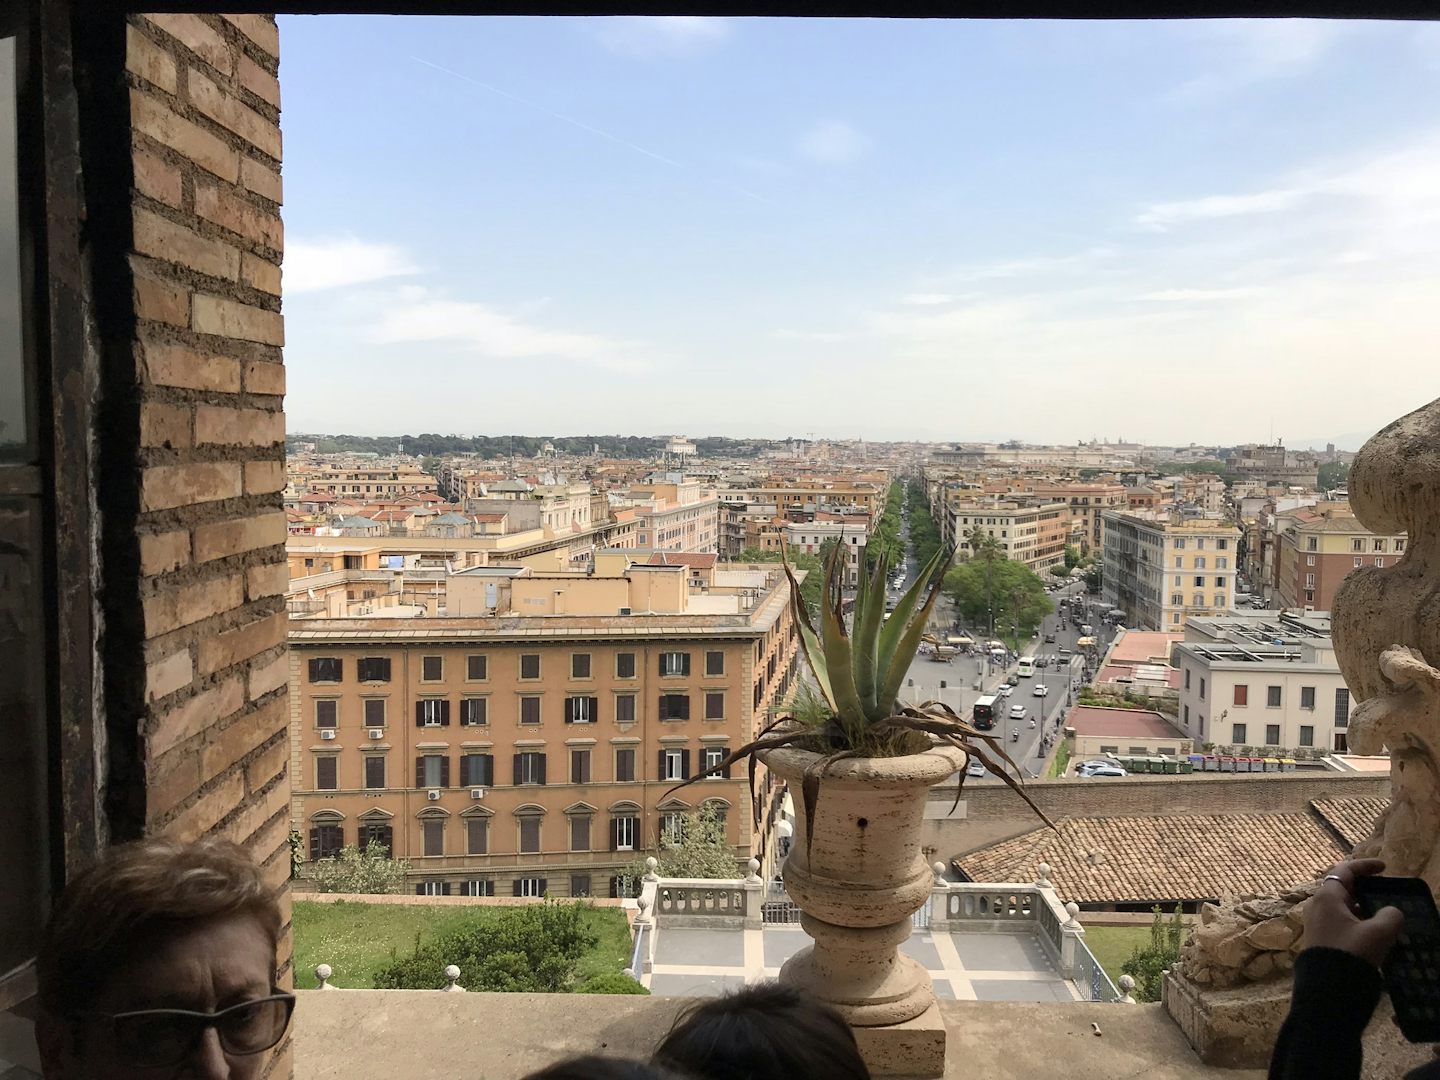 Rome, Italy from the Vatican Museums